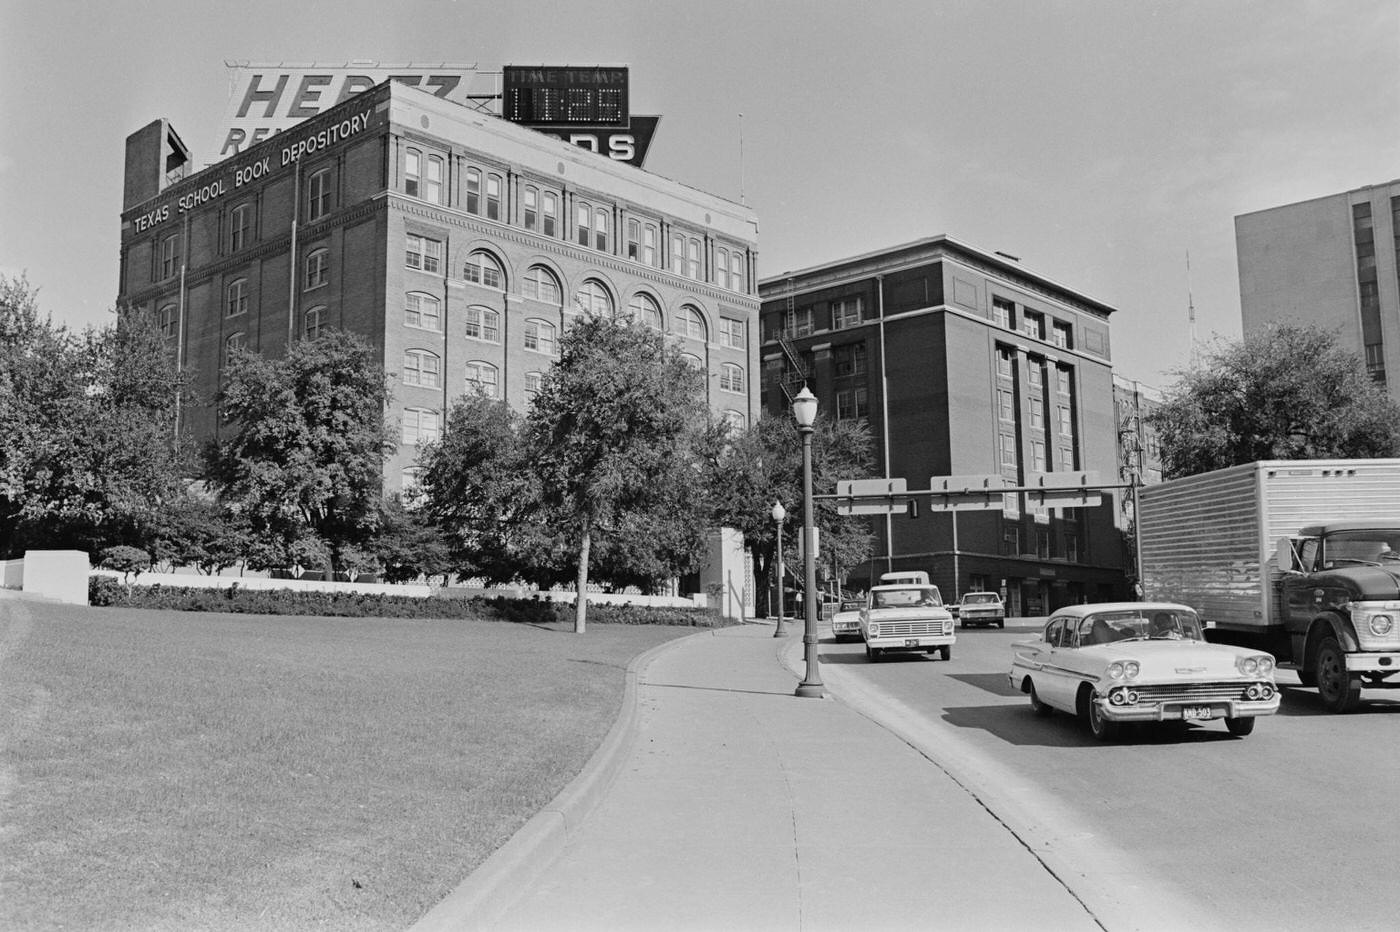 Texas School Book Depository, now known as the Dallas County Administration Building, building facing Dealey Plaza in Dallas, Texas, US, 19th November 1968.